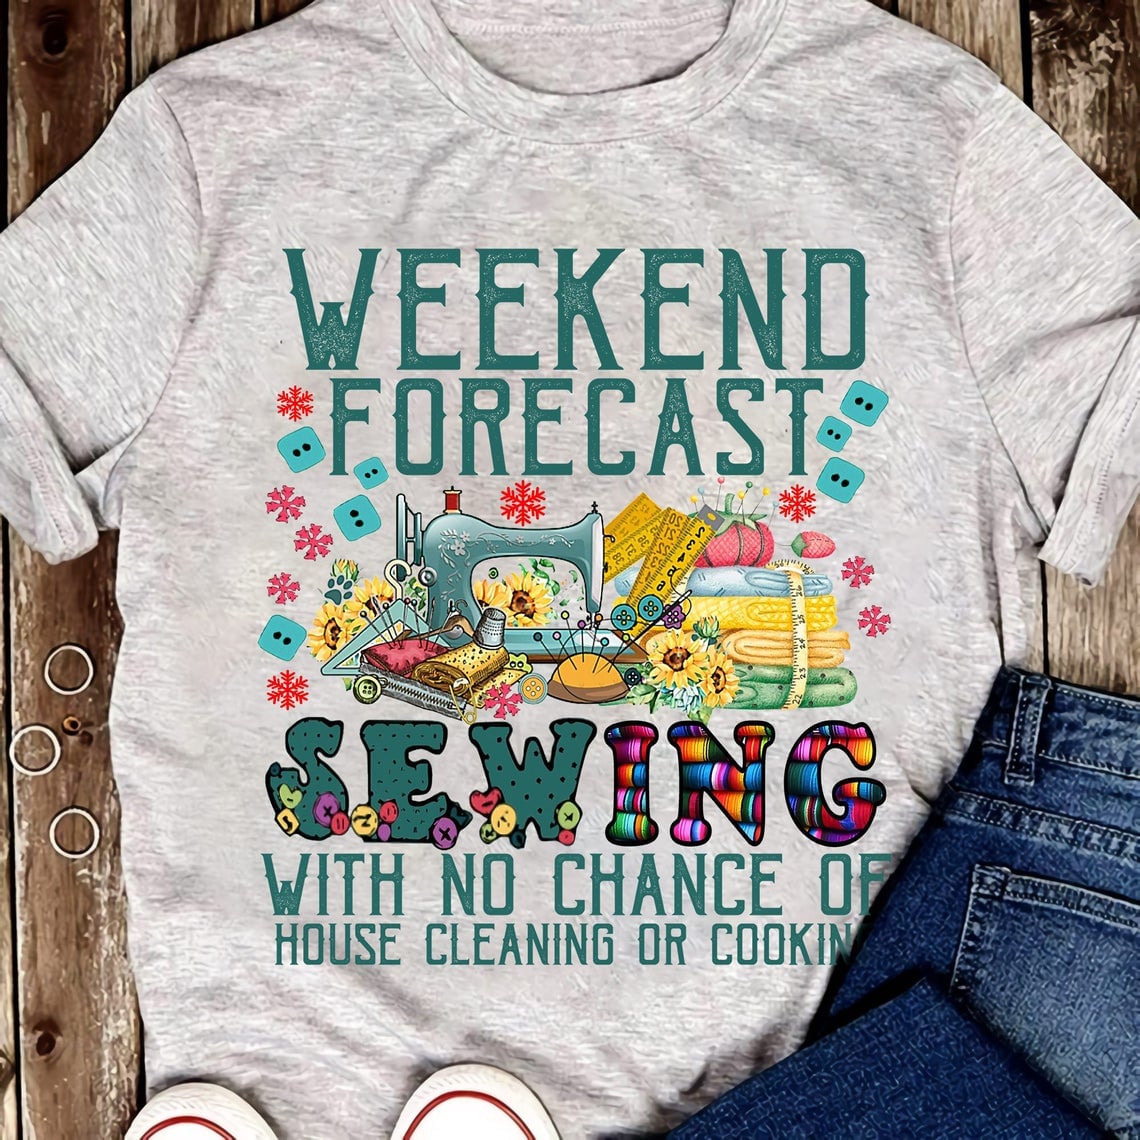 Weekend forecast sewing with no chance of house cleaning or cooking - sewing machine